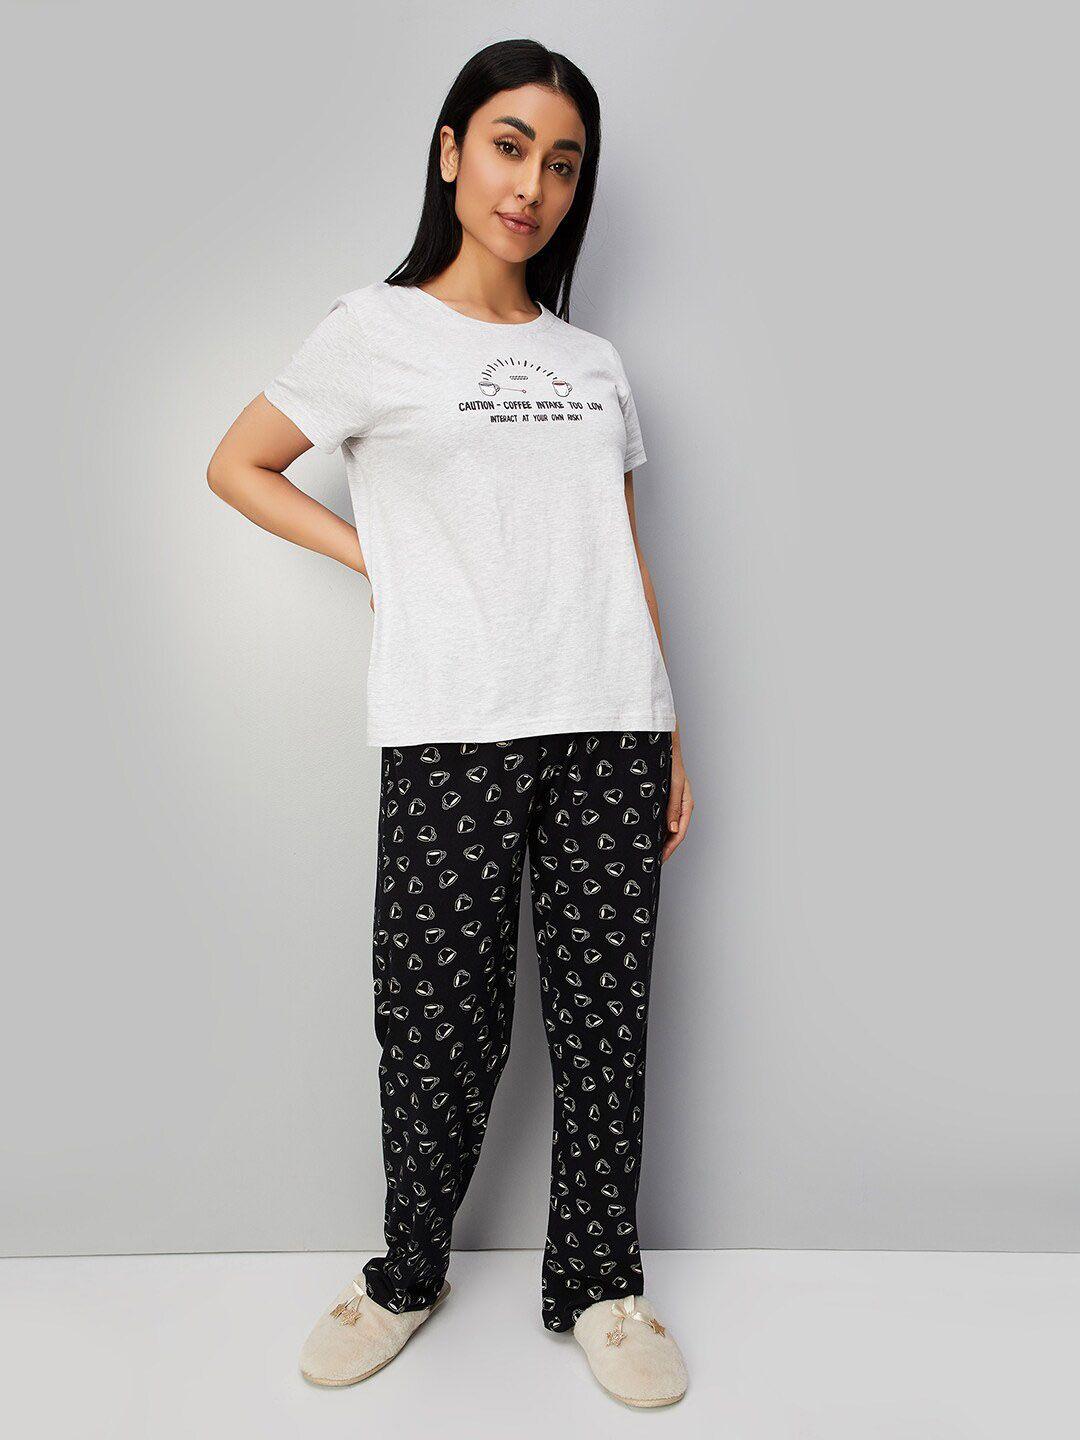 max typography printed night suit